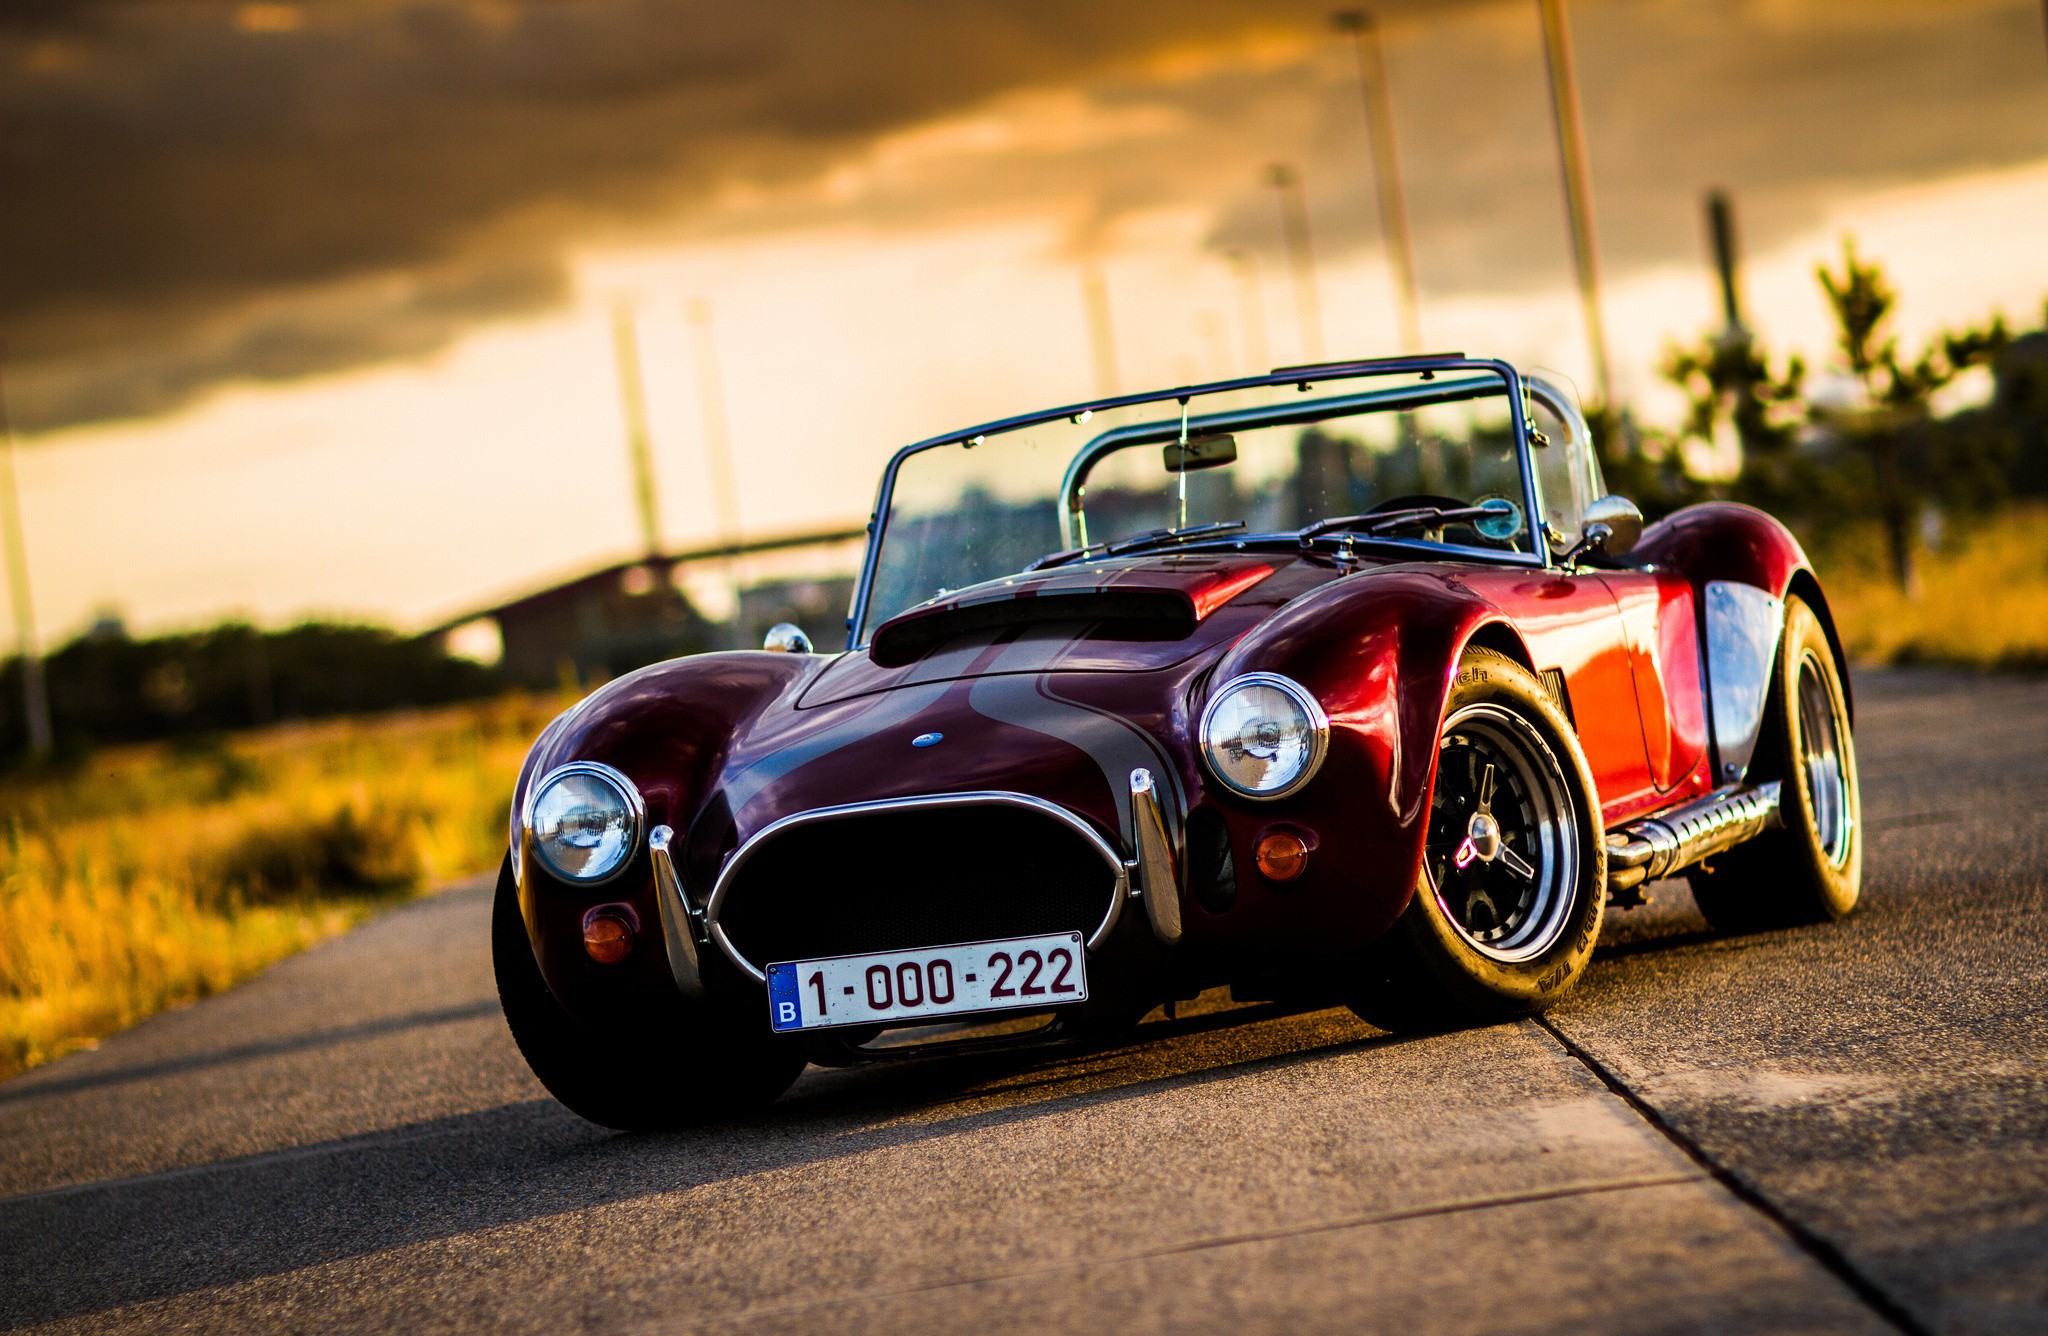 Shelby, Car, Convertible, Sunlight, Shadow, Shelby Cobra, Red Cars Wallpaper